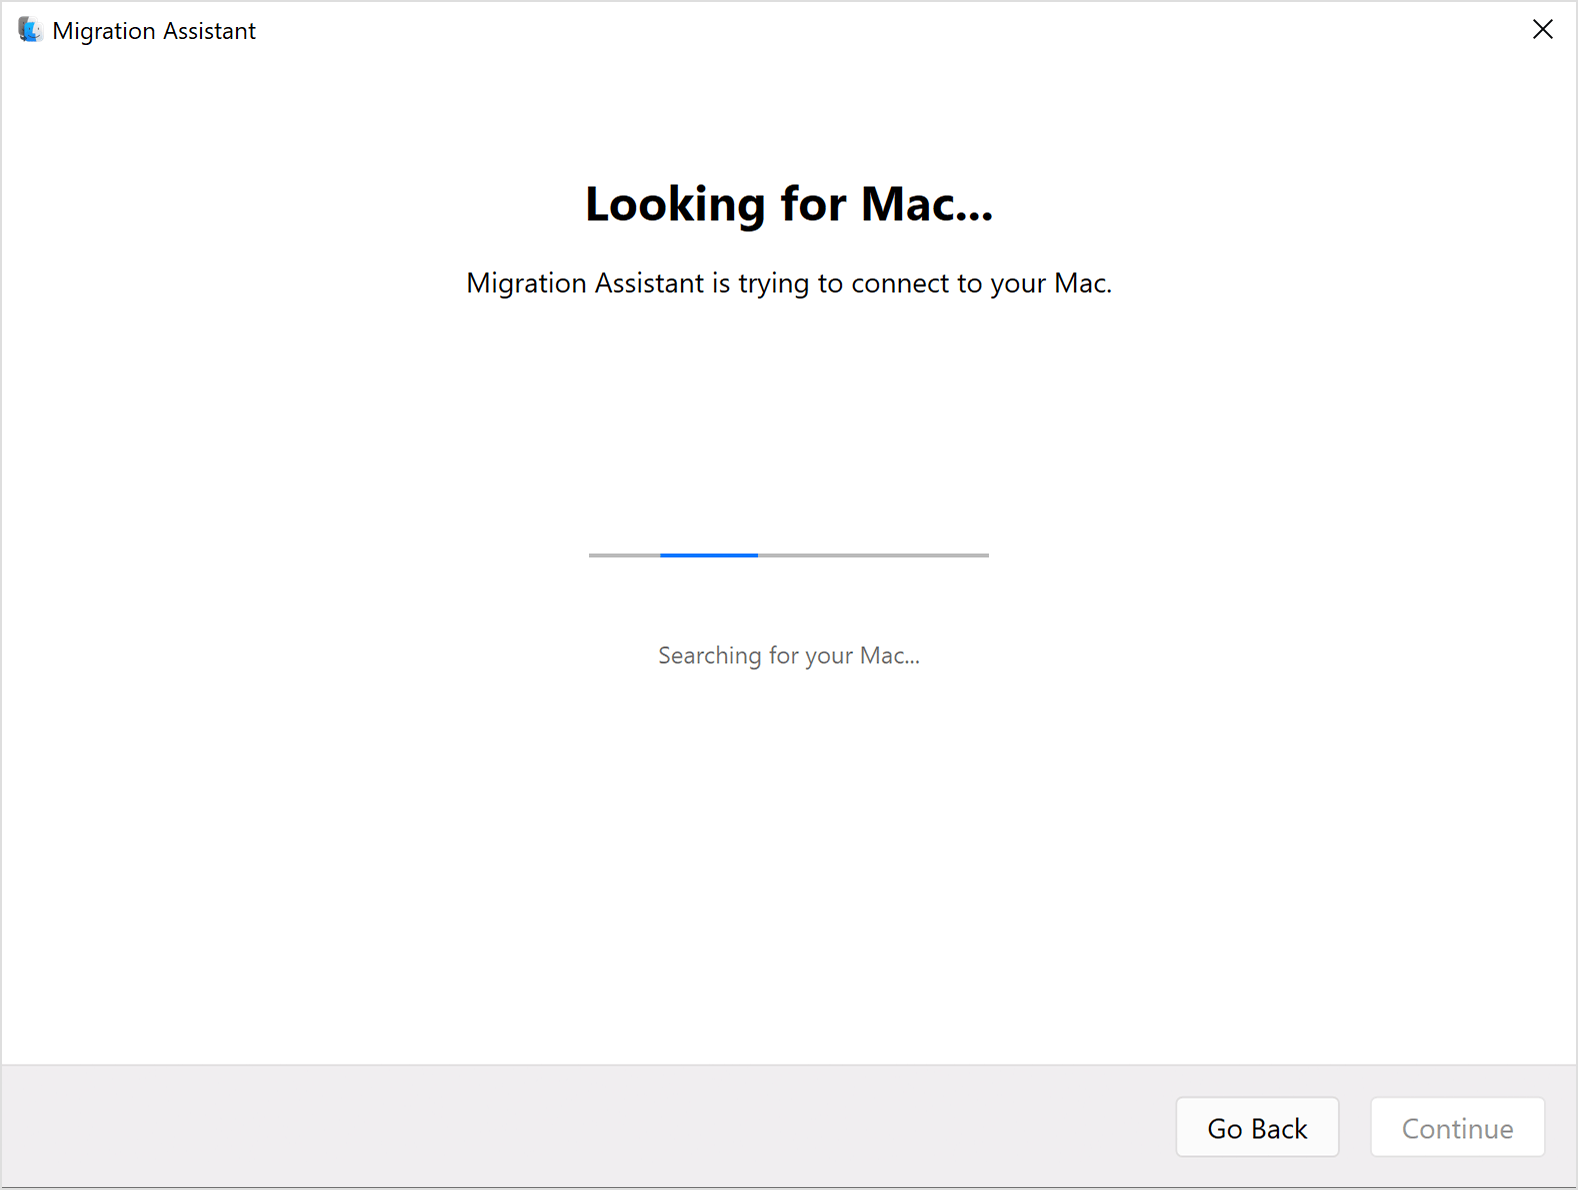 Migration Assistant on PC: Looking for Mac...